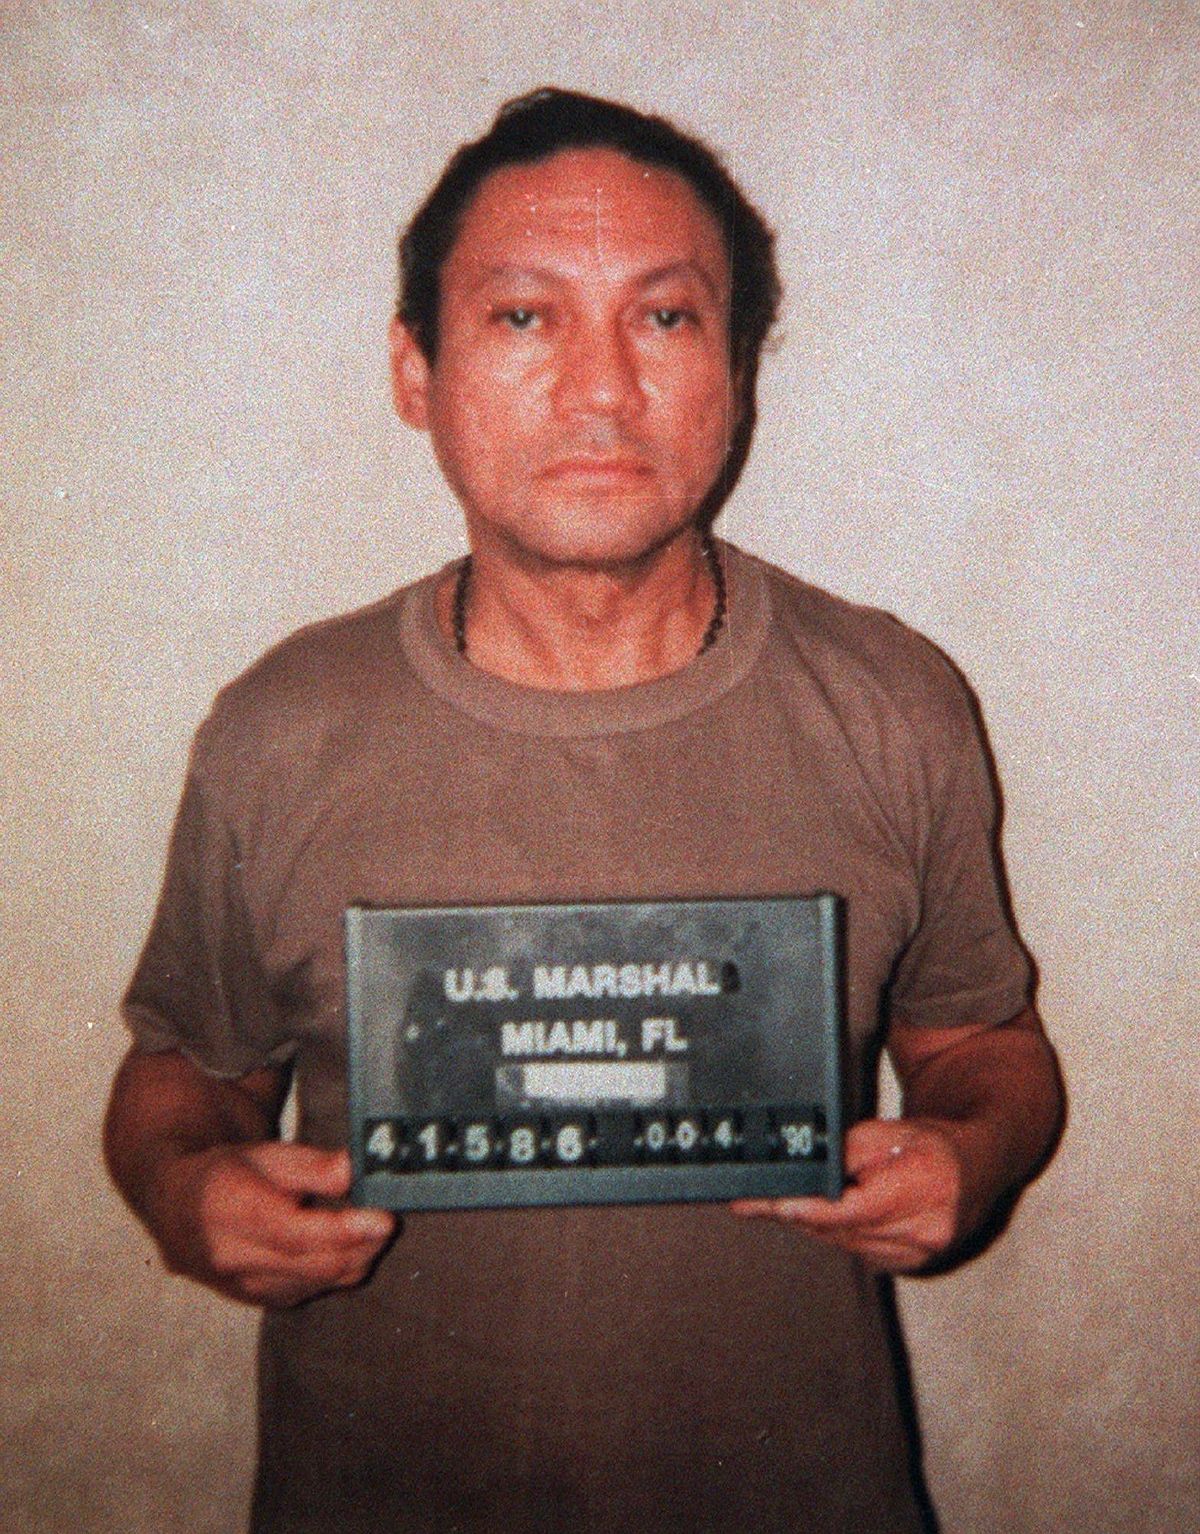 This Jan.1990, file photo shows deposed Panamanian Gen. Manuel Antonio Noriega, who is serving a 40-year sentence in Miami for drug trafficking. A source close to the family of former Panamanian dictator Manuel Noriega said Monday, May 29, 2017, that he has died at age 83. The source was not authorized to be quoted by name. (Anonymous / Associated Press)